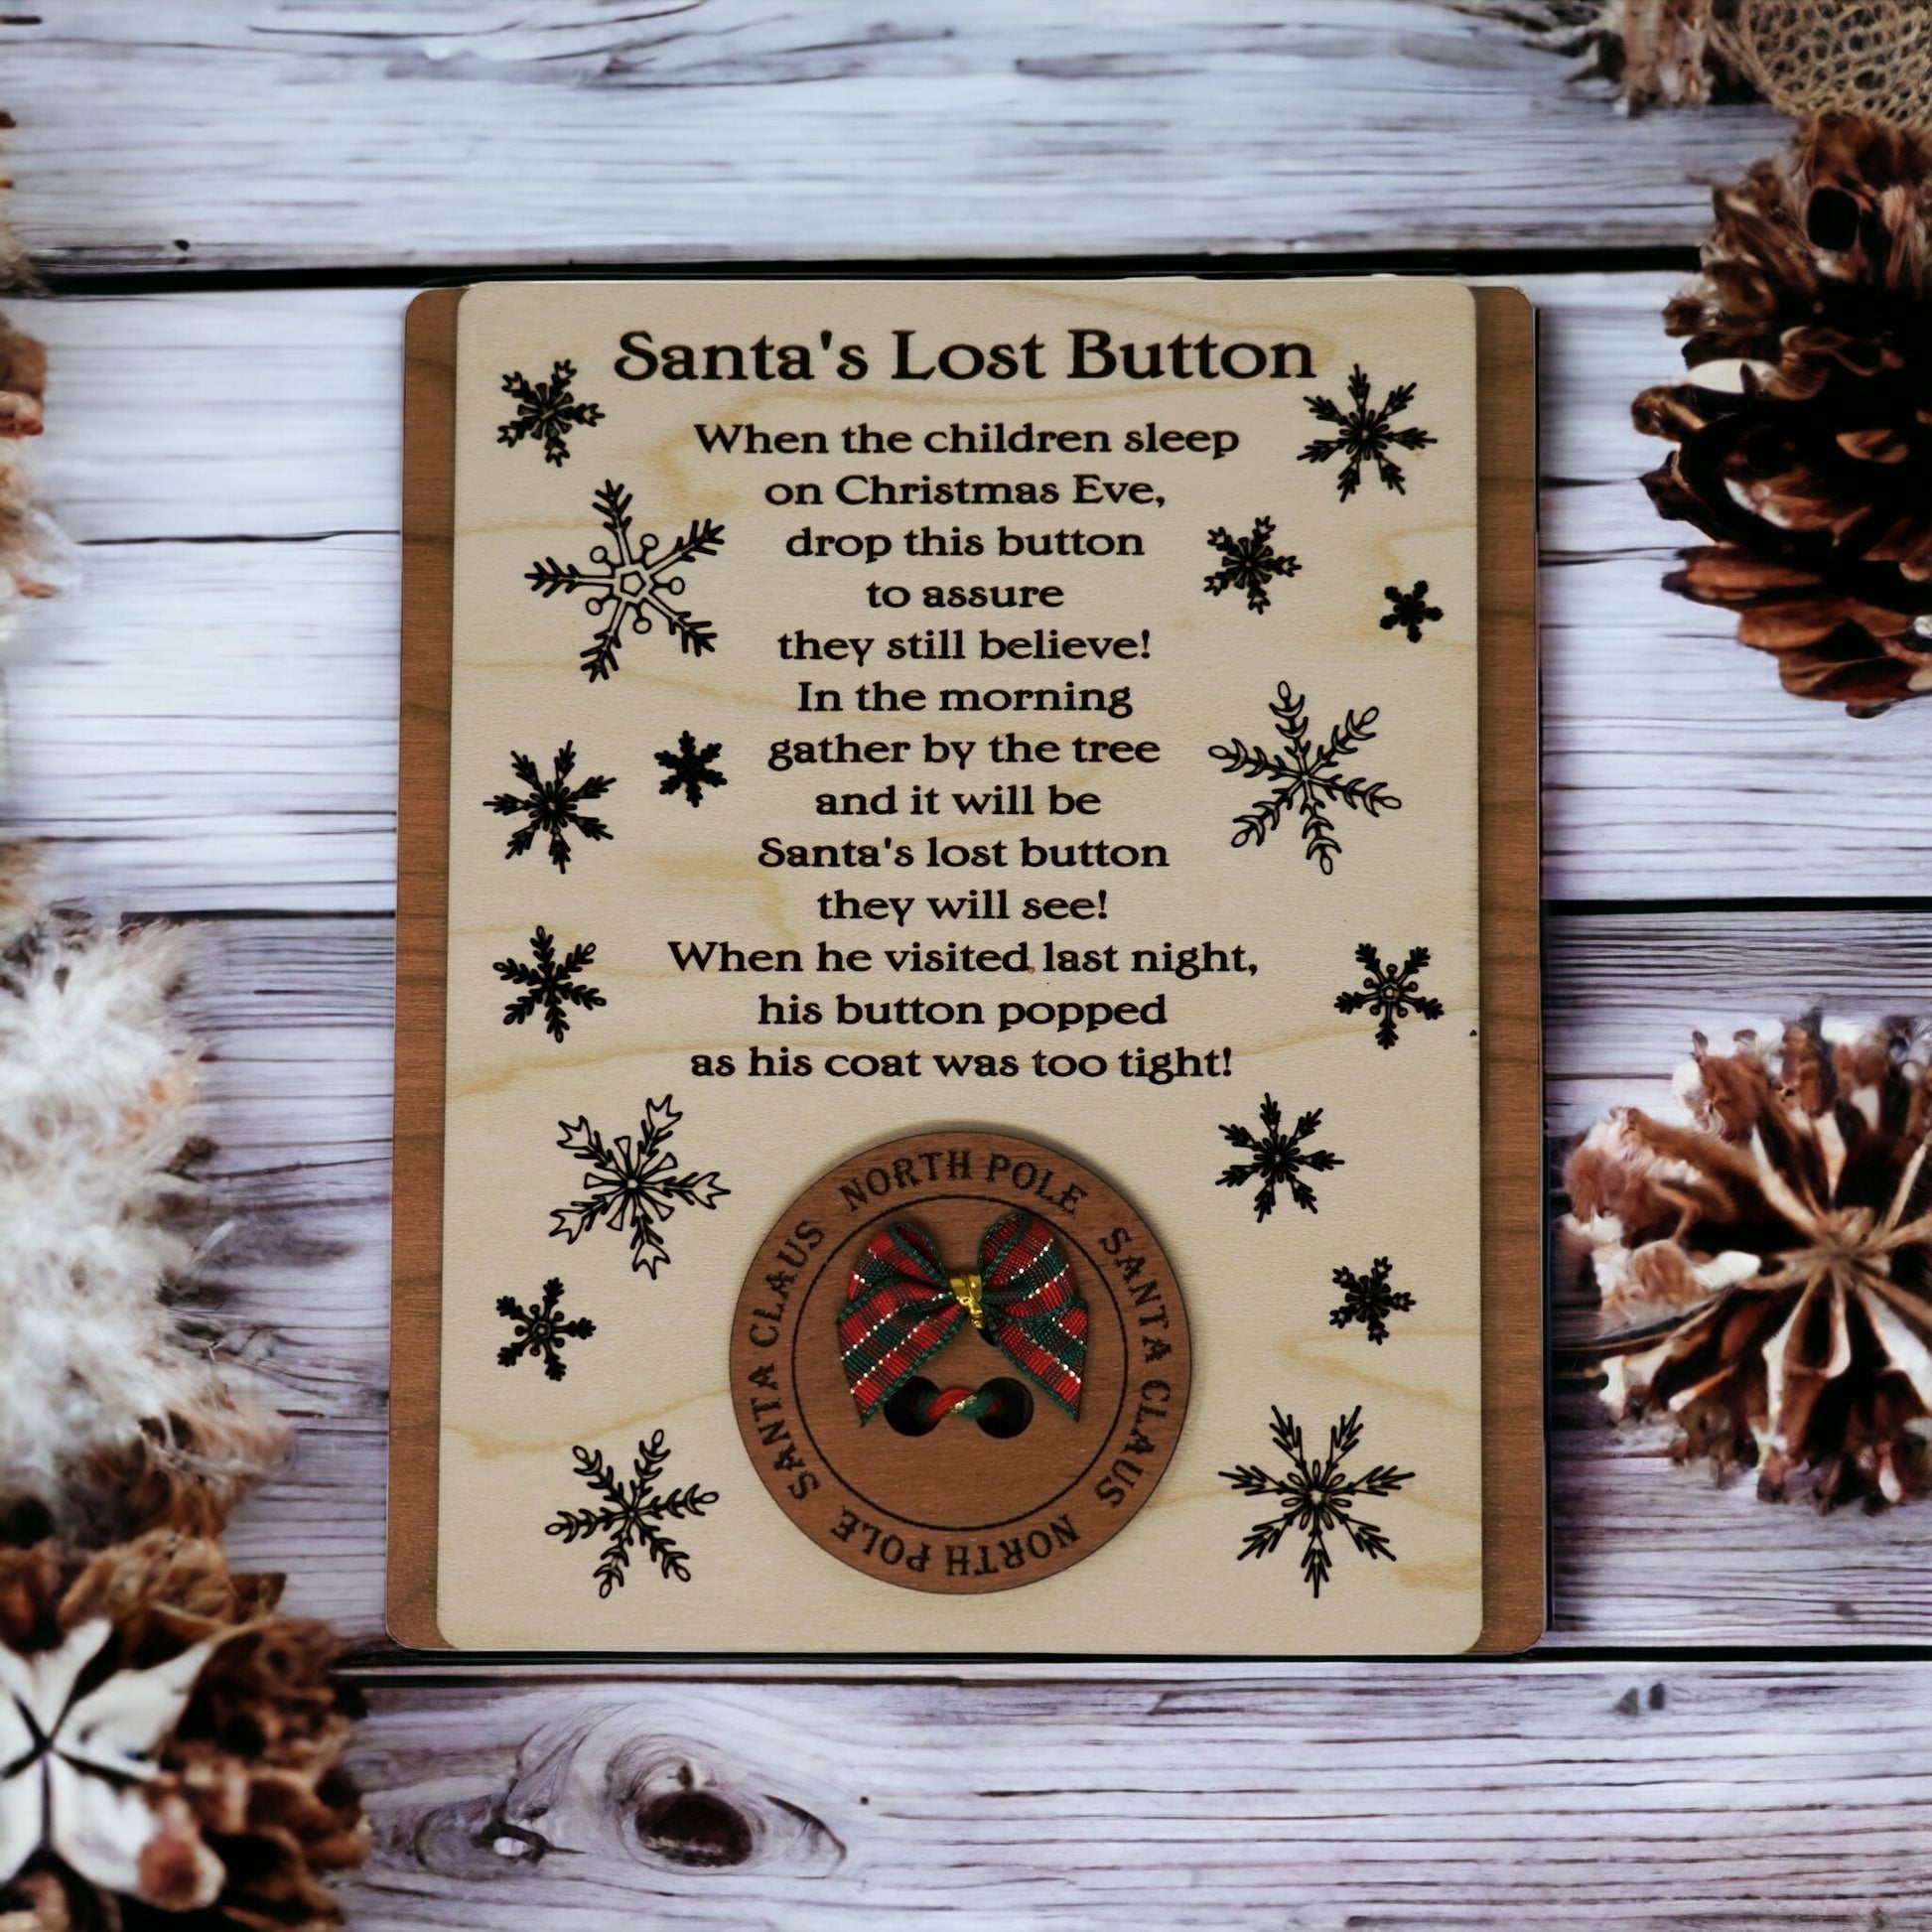 Santas Magical Lost Button, Custom Keepsake Family Gift, Kids Christmas Ornament, Present for Child from Santa, Xmas Traditions for Families